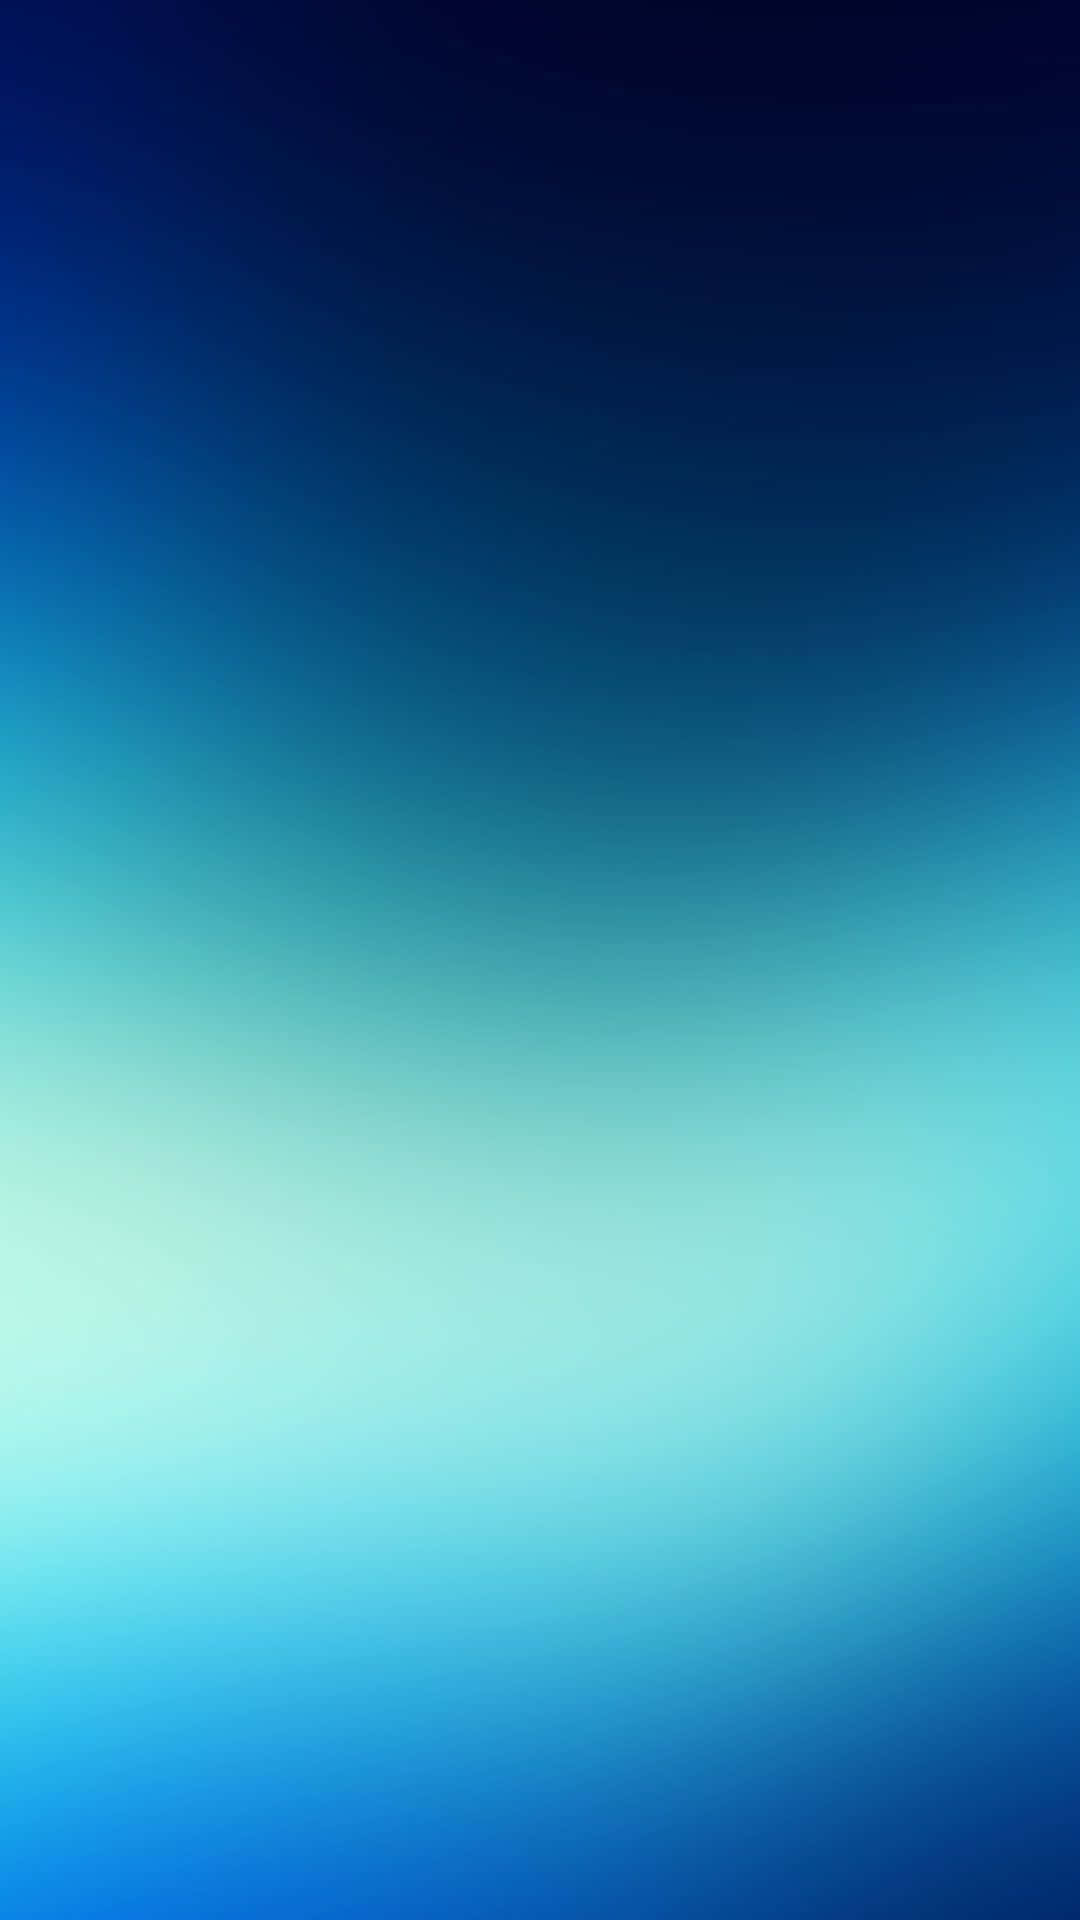 Cool Blue Abstract Iphone Gradient Effect Wallpaper